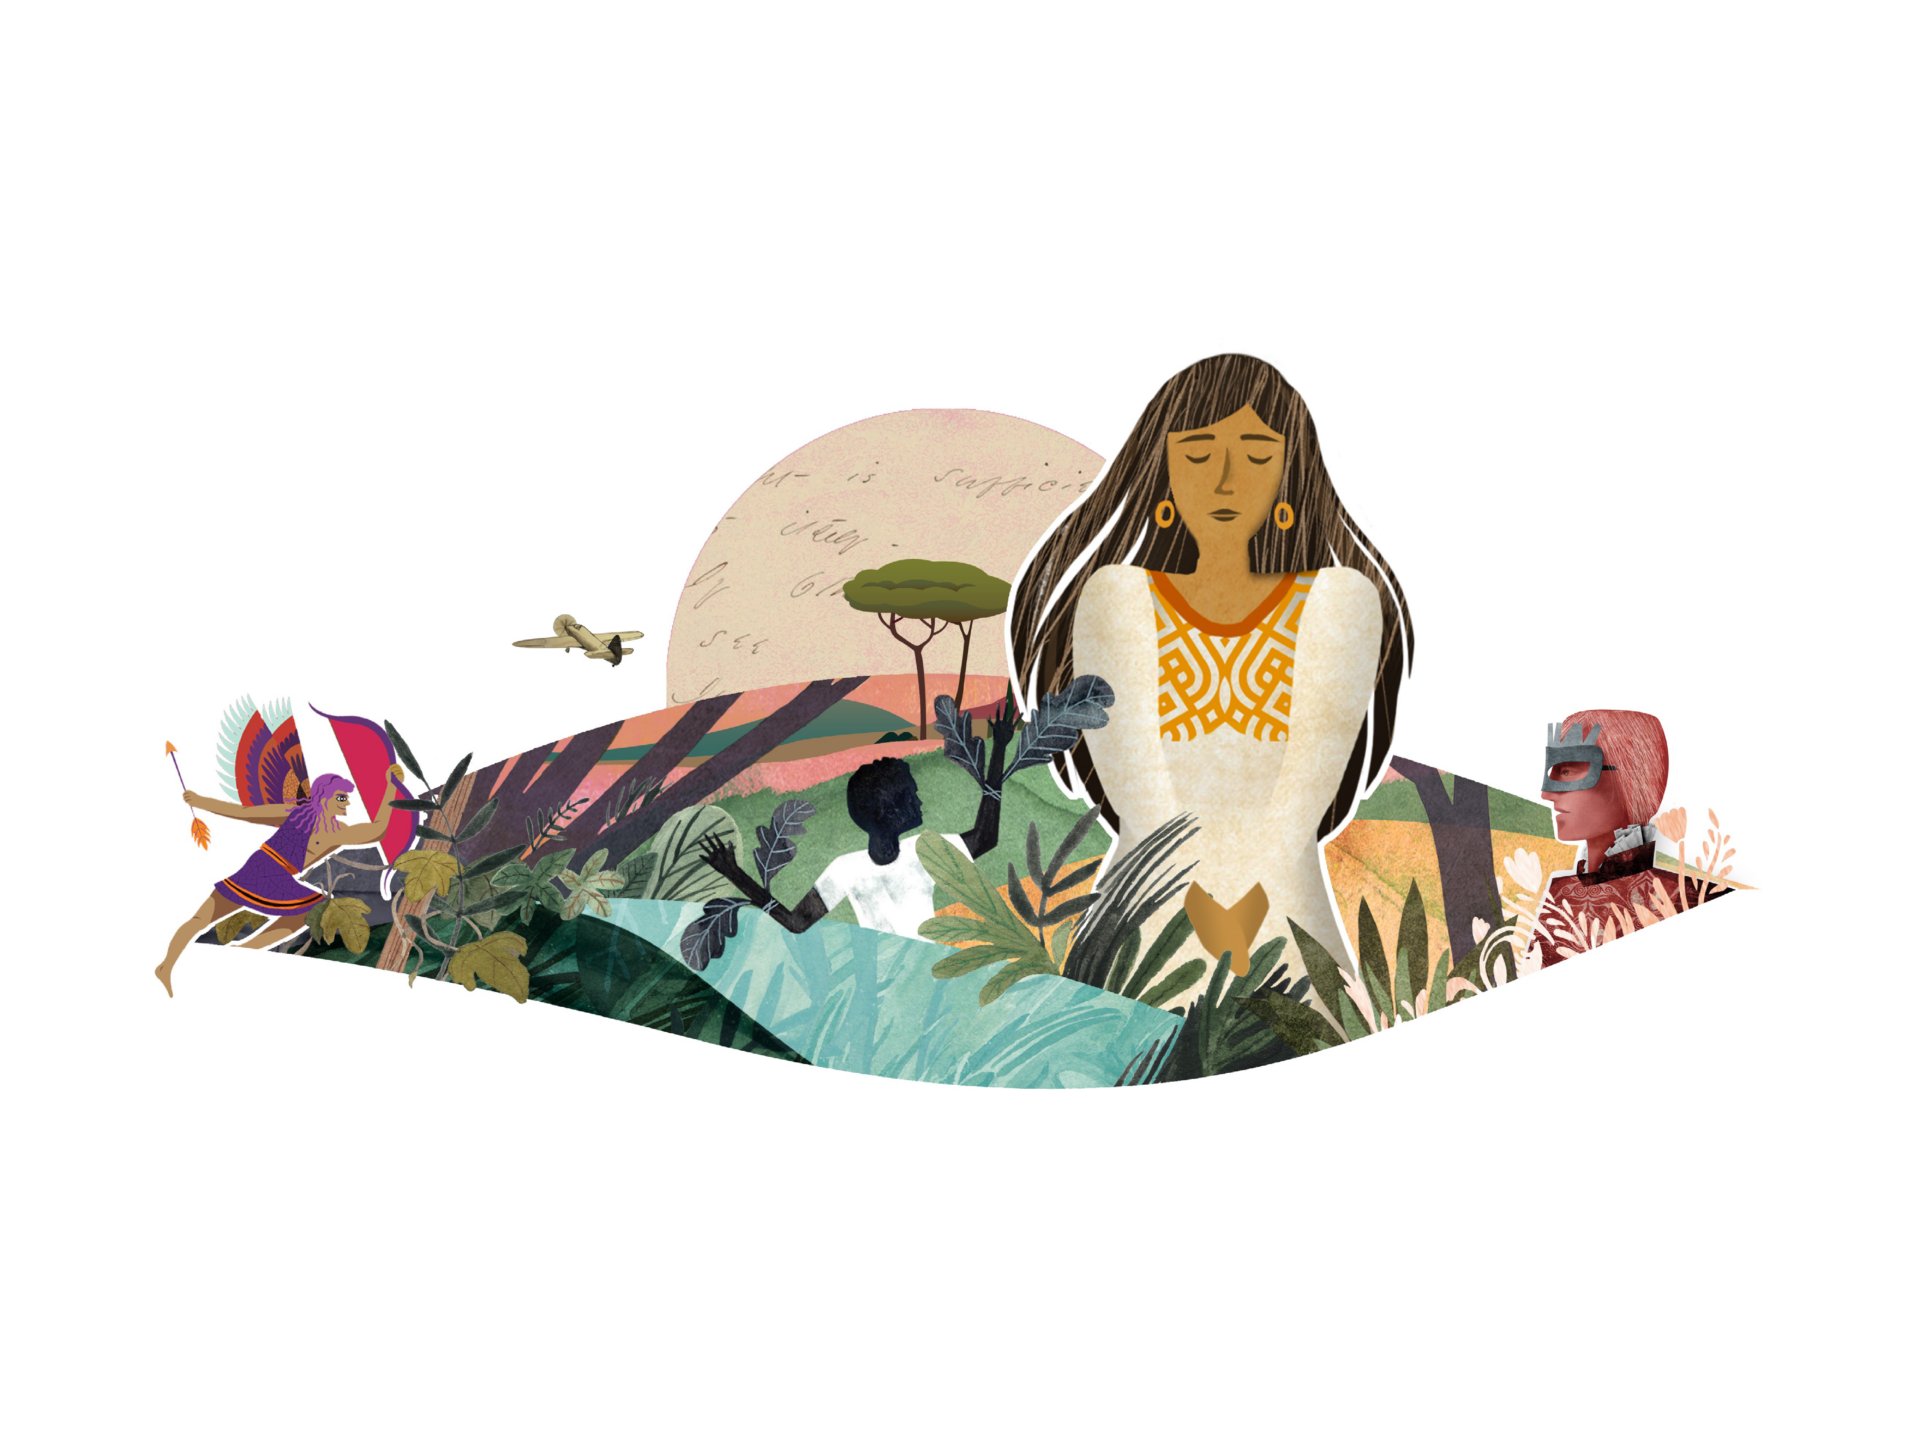 Illustration of a diverse ecosystem featuring a woman in traditional attire, various plants, a bird, and a mailbox, set against a sunset backdrop, designed to amplify ELA 6–8 reading comprehension